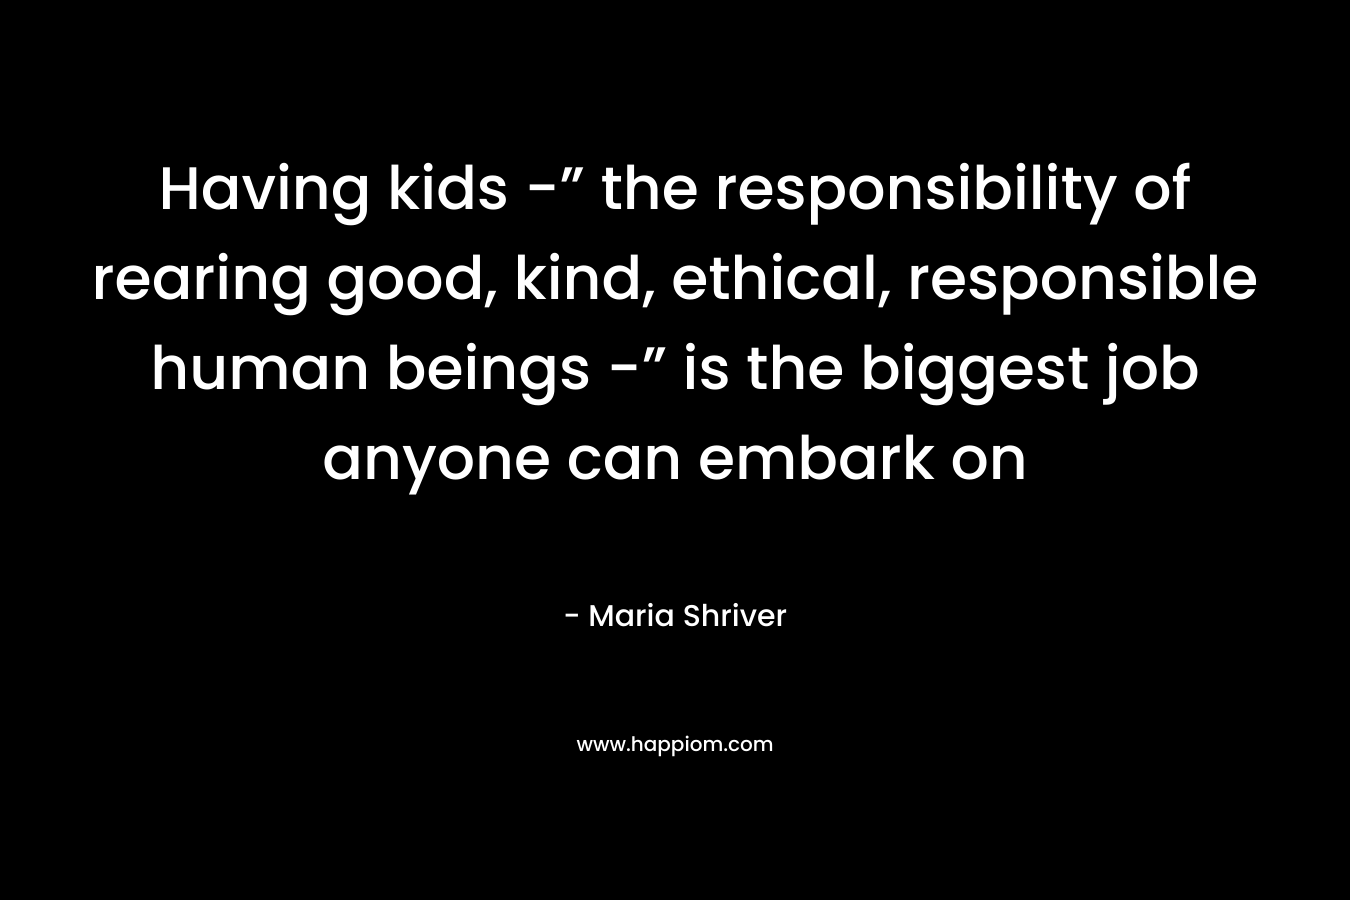 Having kids -” the responsibility of rearing good, kind, ethical, responsible human beings -” is the biggest job anyone can embark on